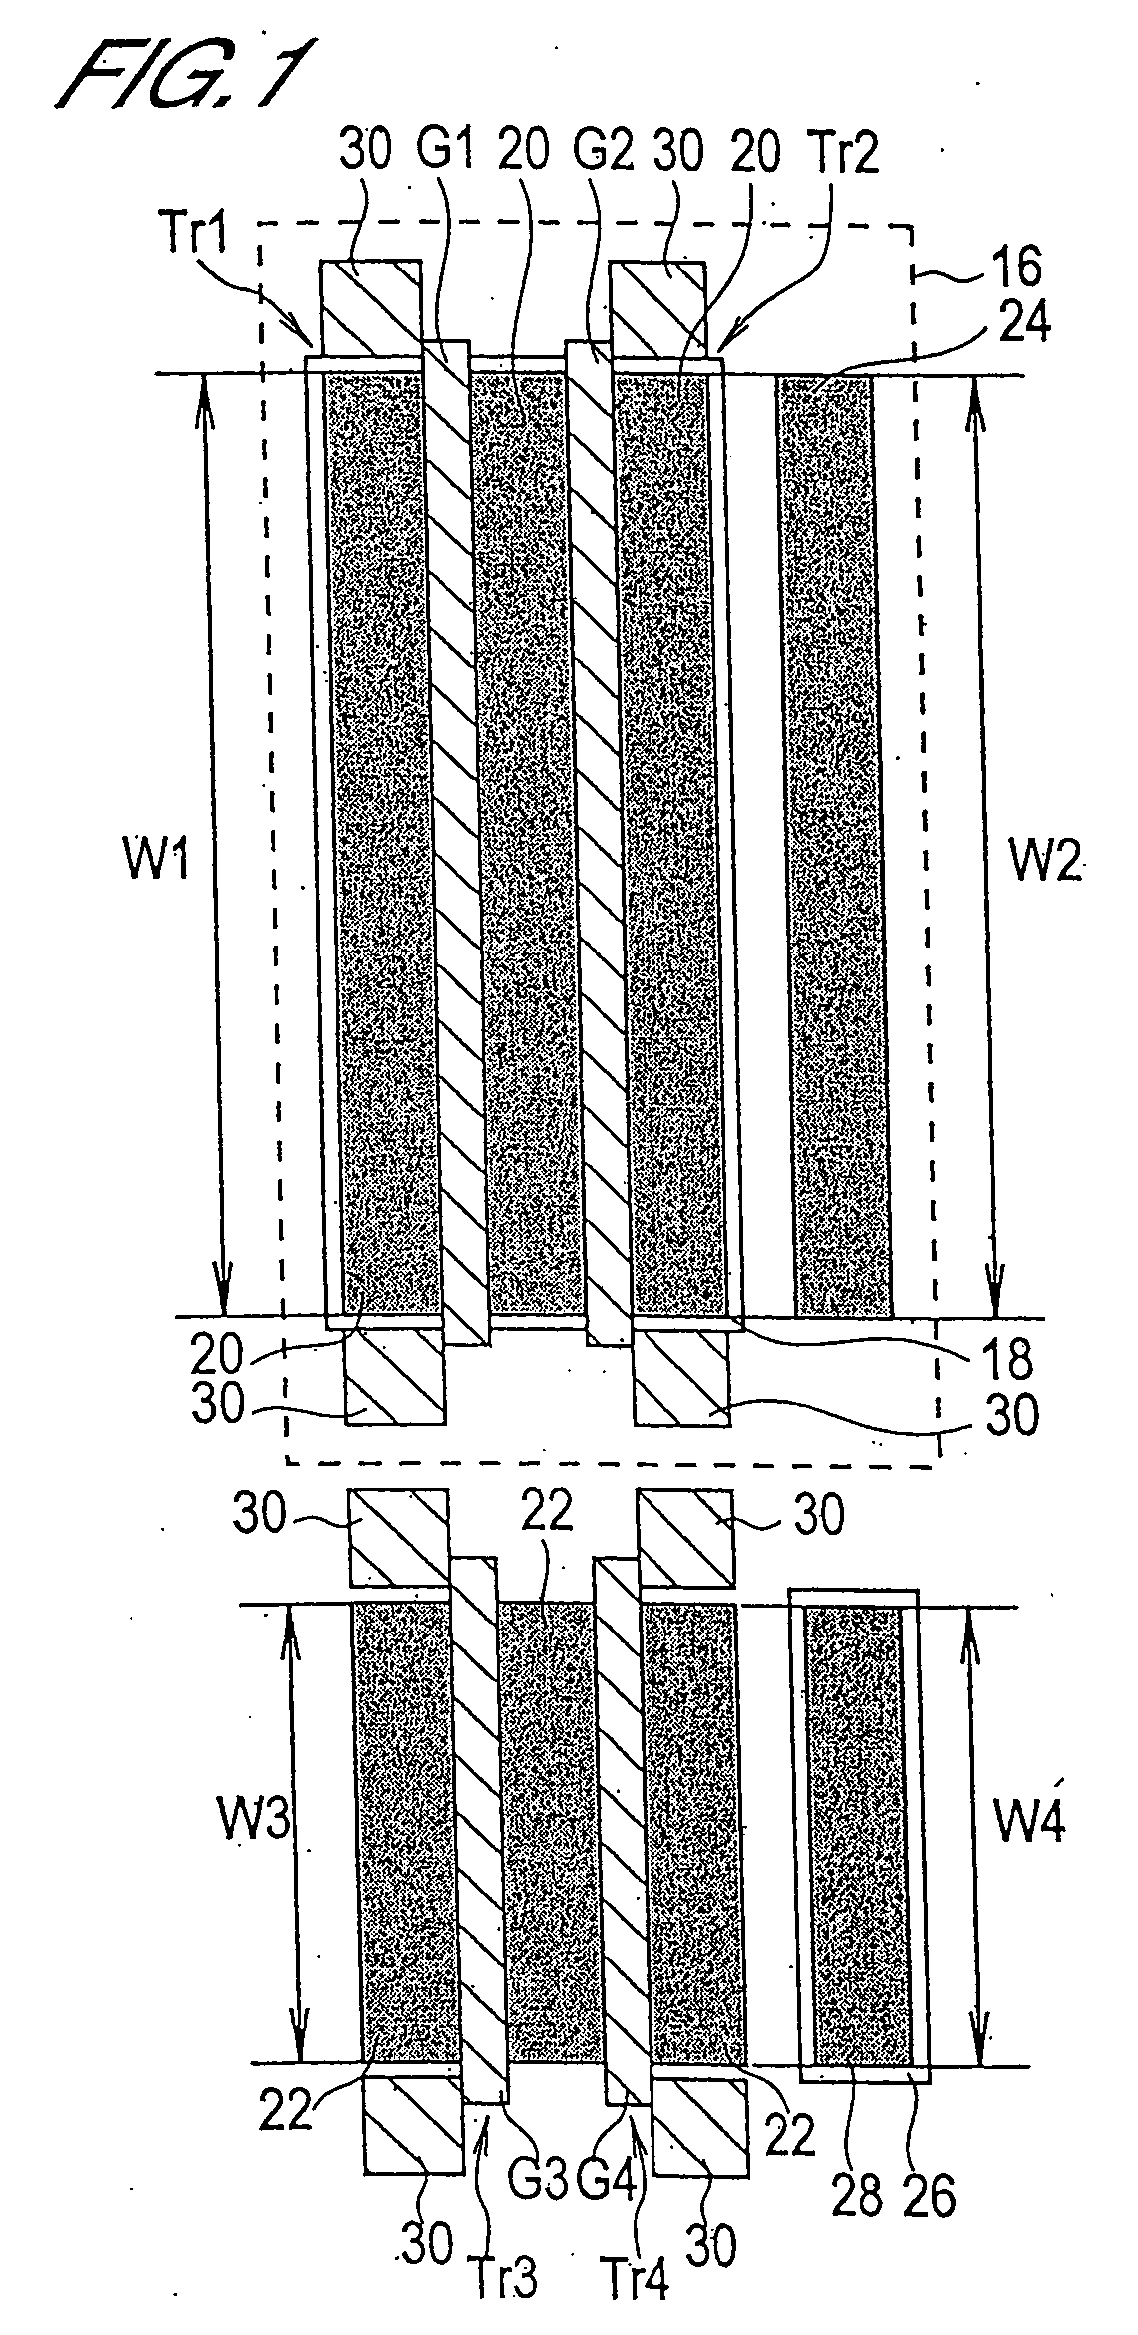 Basic cells configurable into different types of semiconductor integrated circuits